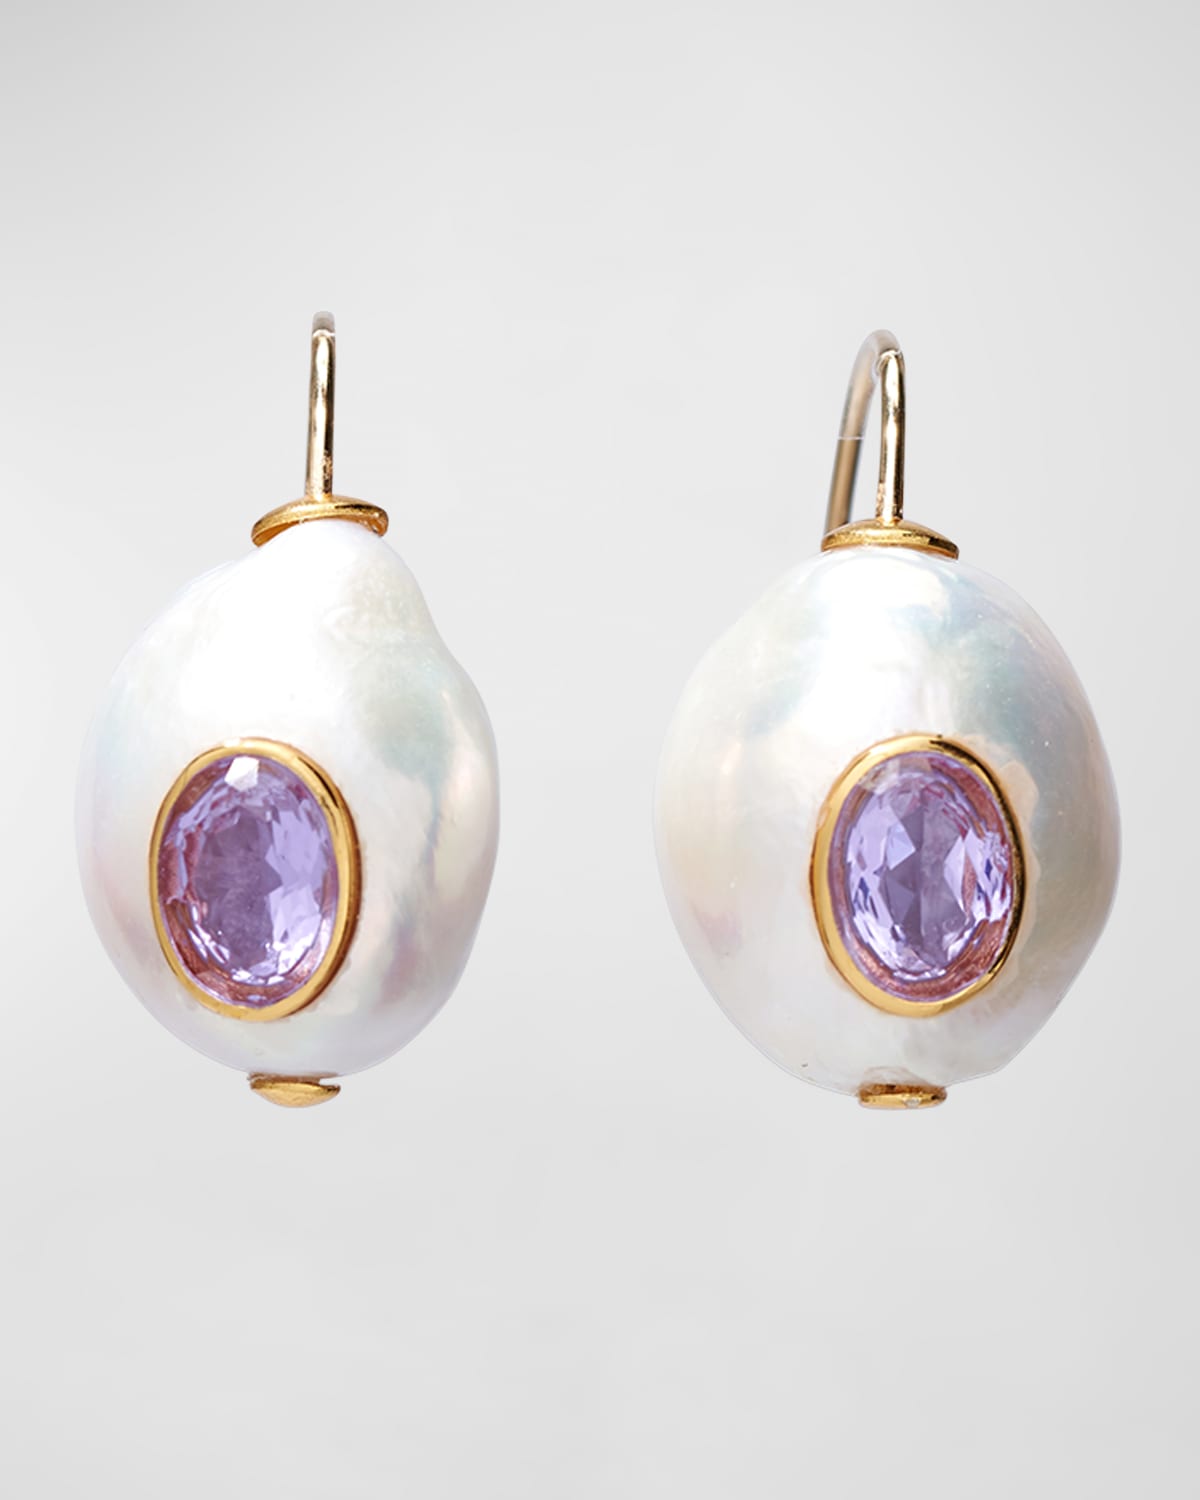 Pablo 24K Gold Plated Baroque Pearl and Blue Topaz Drop Earrings